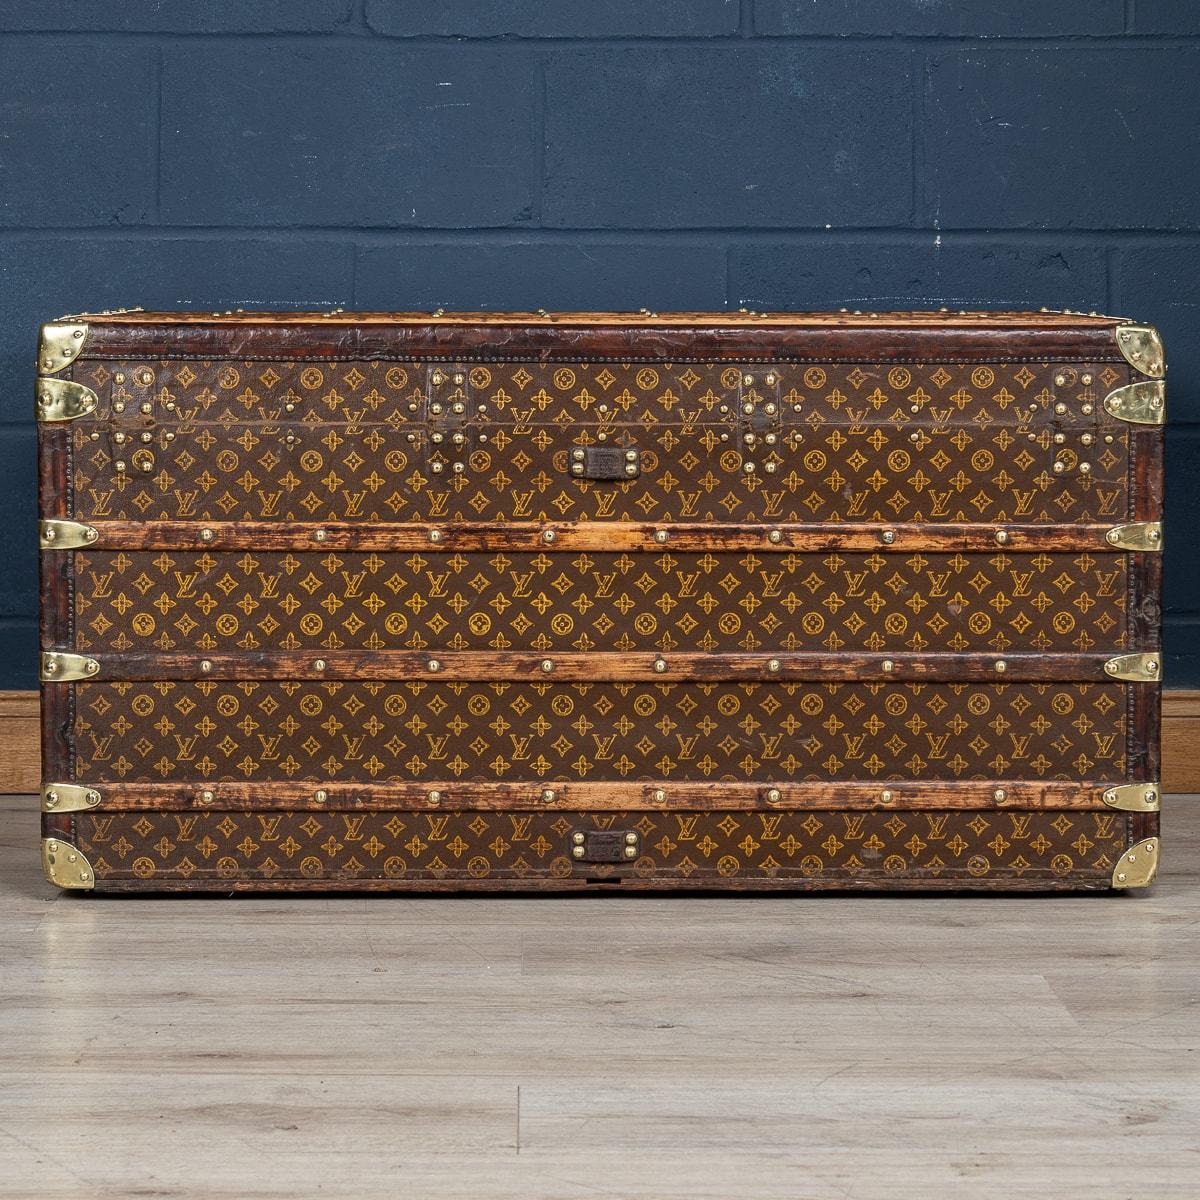 French 20th Century Louis Vuitton Trunk In Monogram Canvas, France c.1910 For Sale